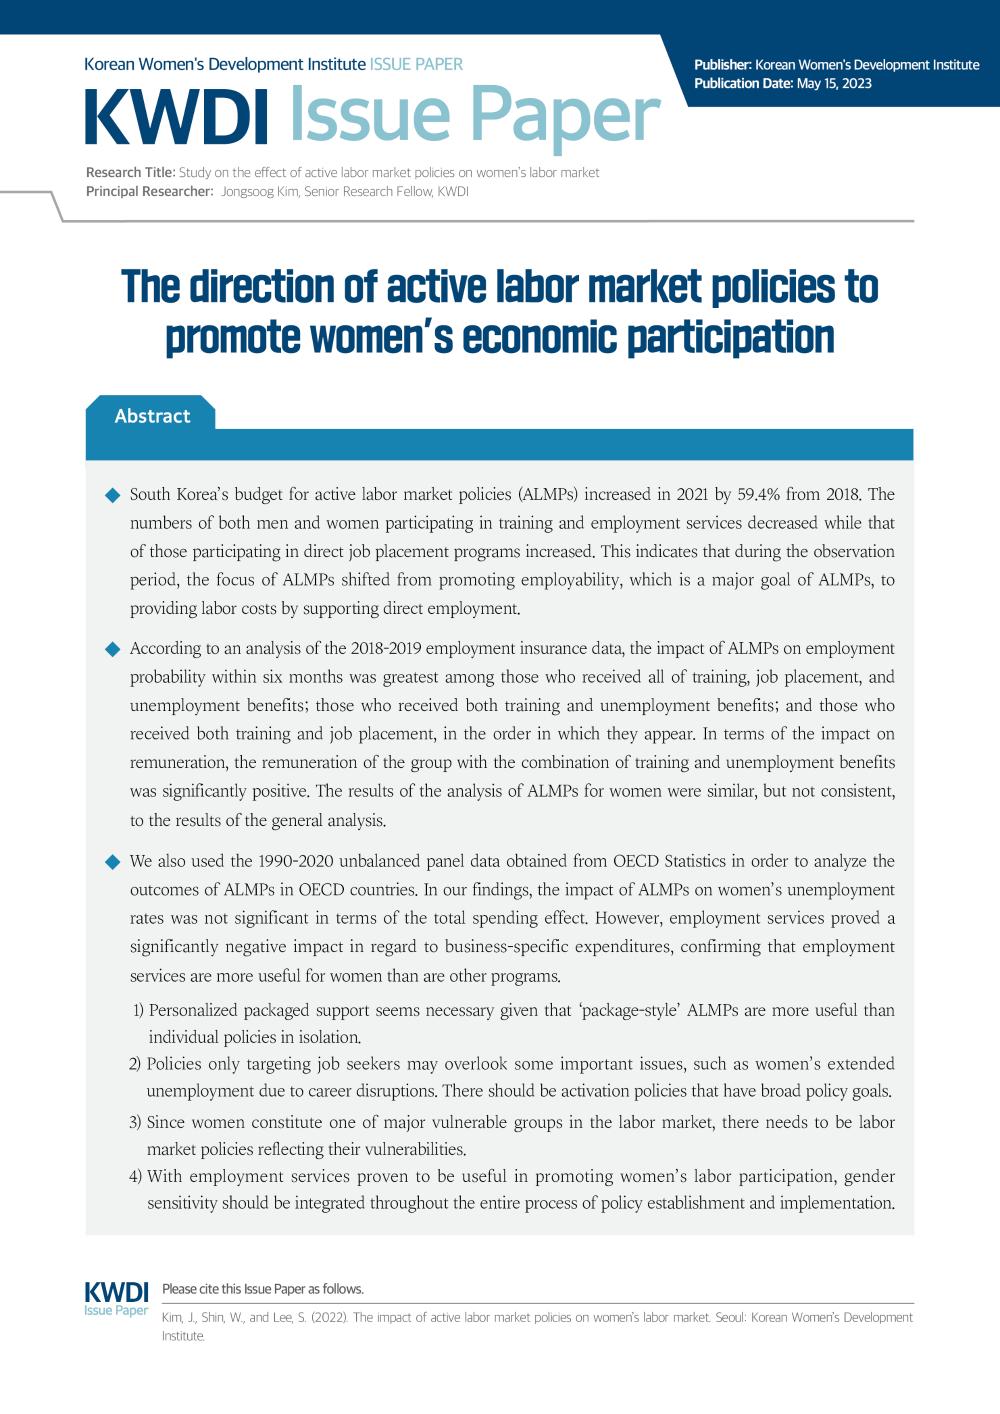 [Issue Paper] The Direction of Active Labor Market Policies to Promote Women’s Economic Participation